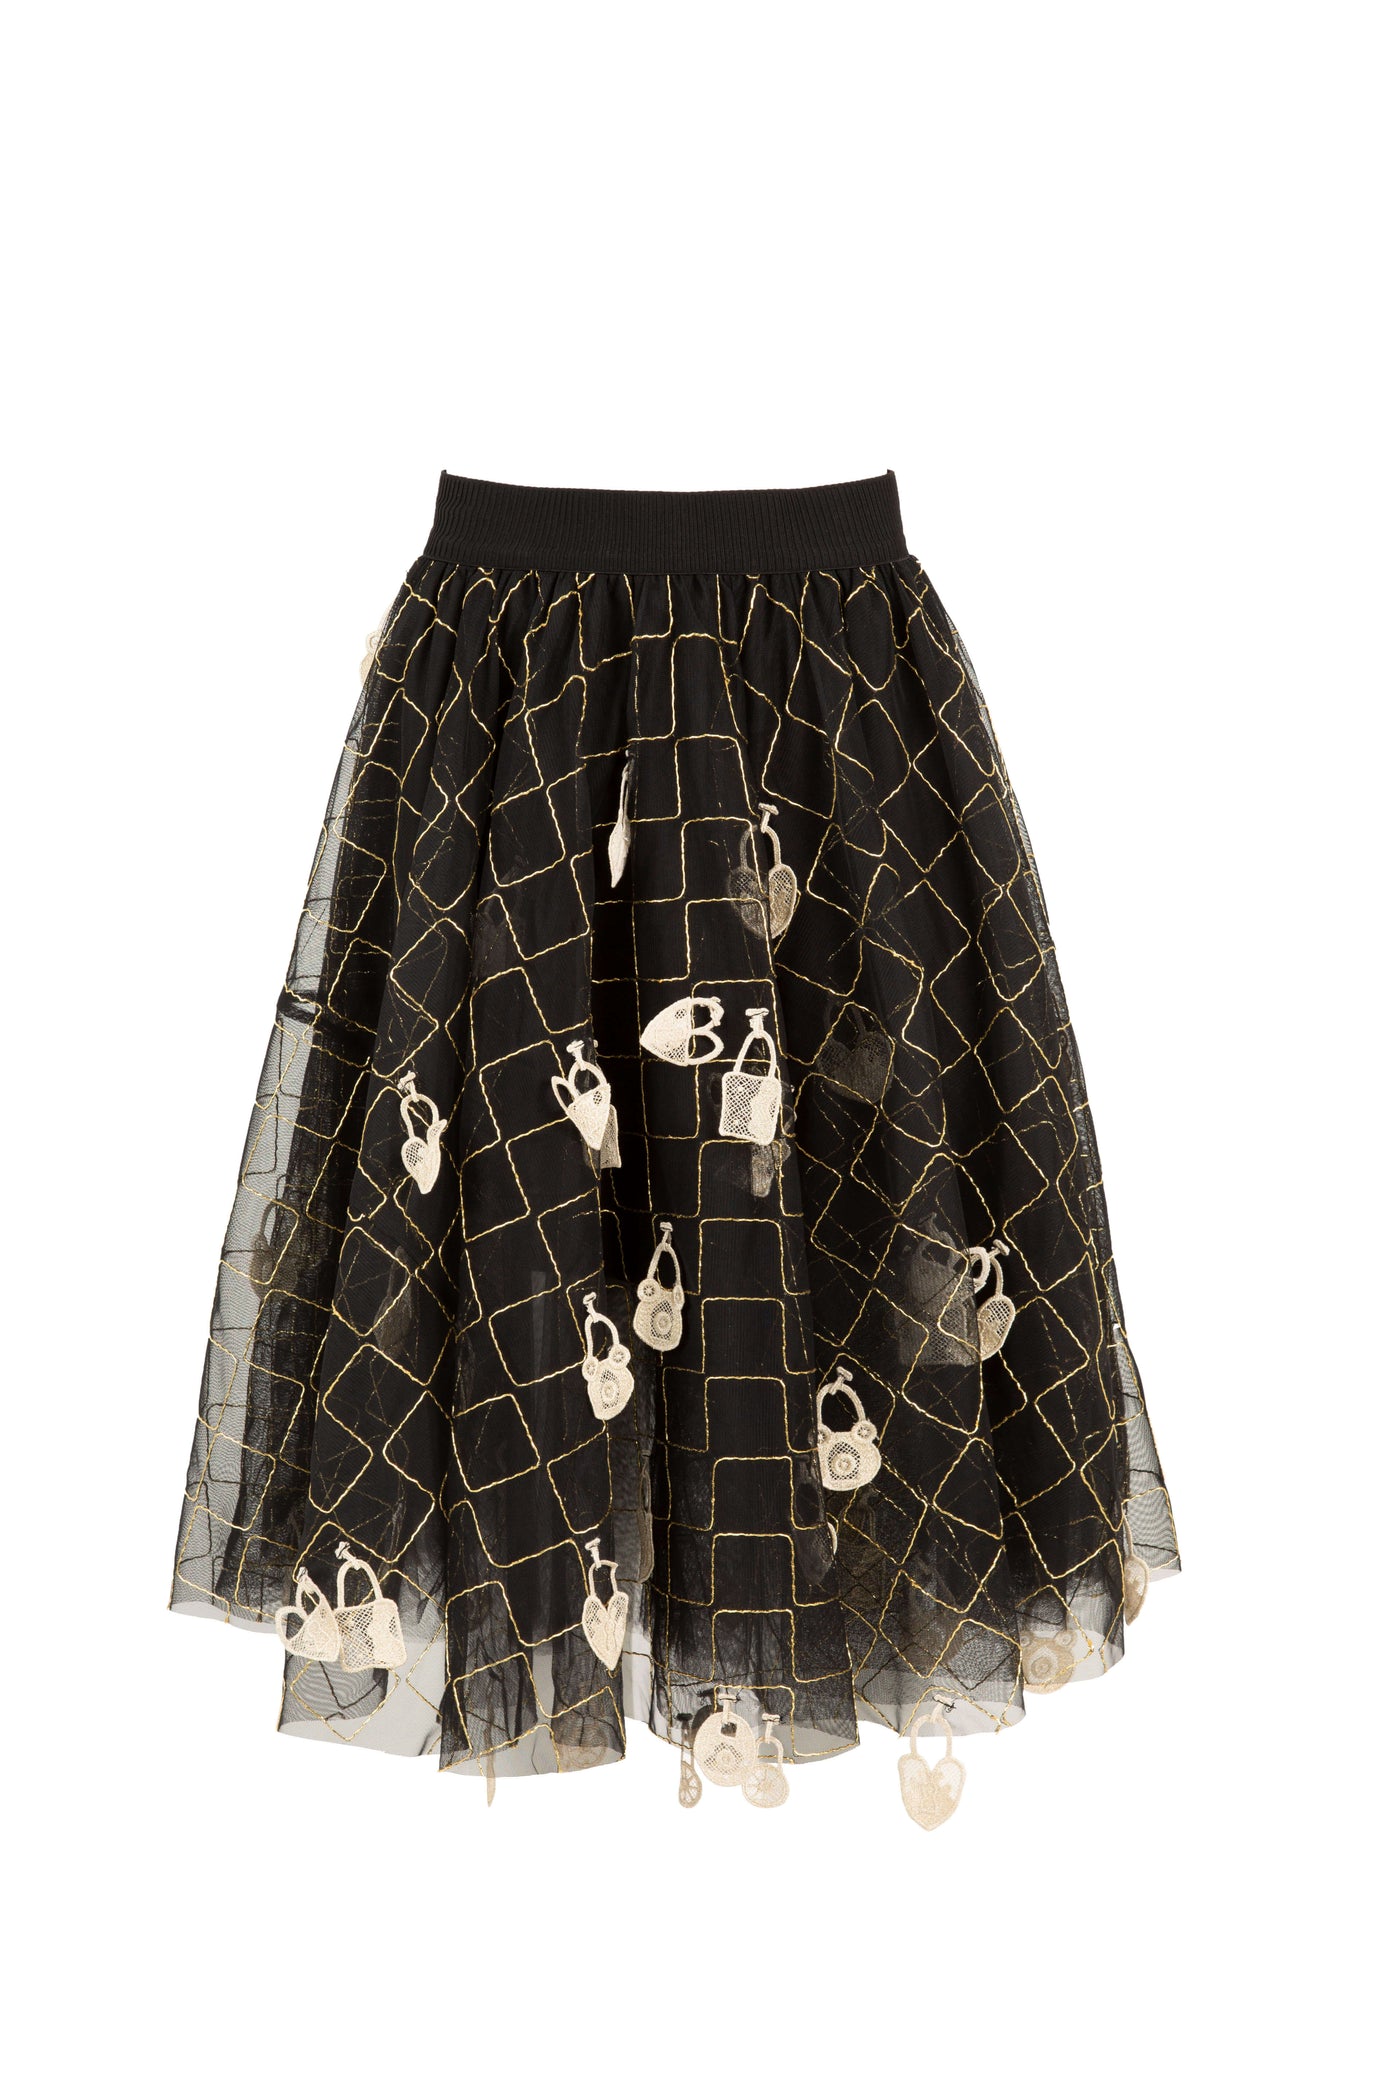 Key To My Heart Skirt - Coop